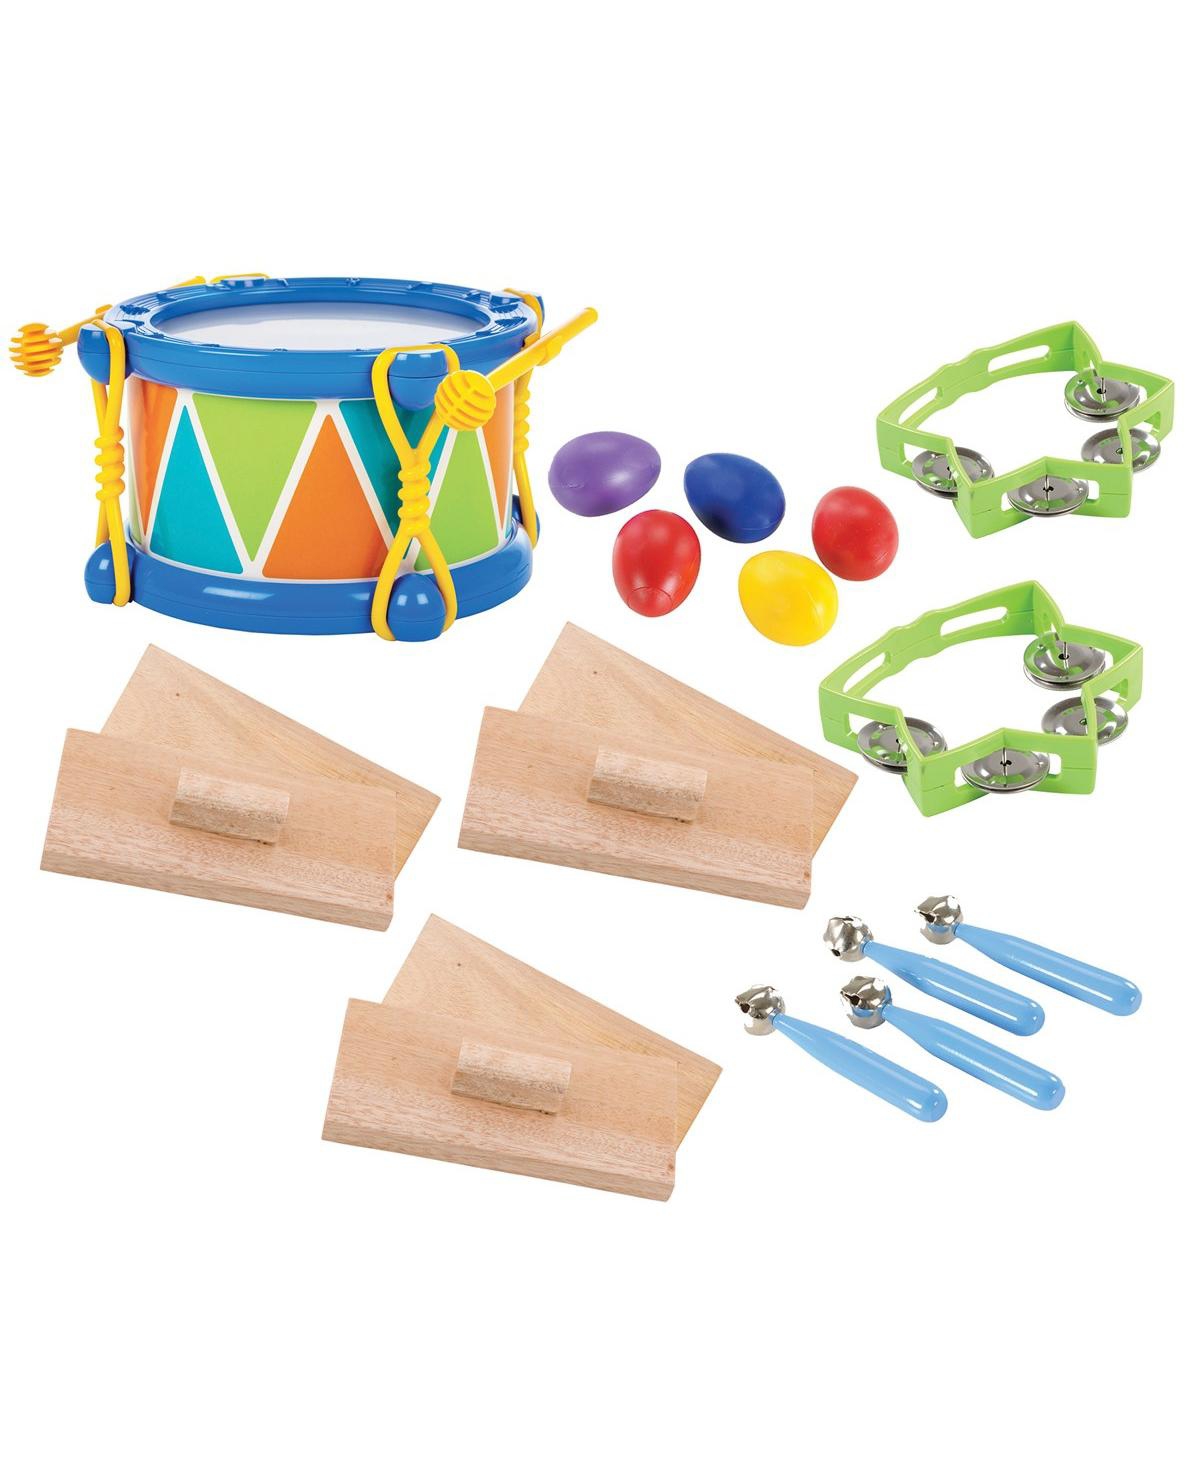 Kaplan Early Learning Babies' Toddler Rhythm Band Set Of 5 Different Instruments In Multicolored